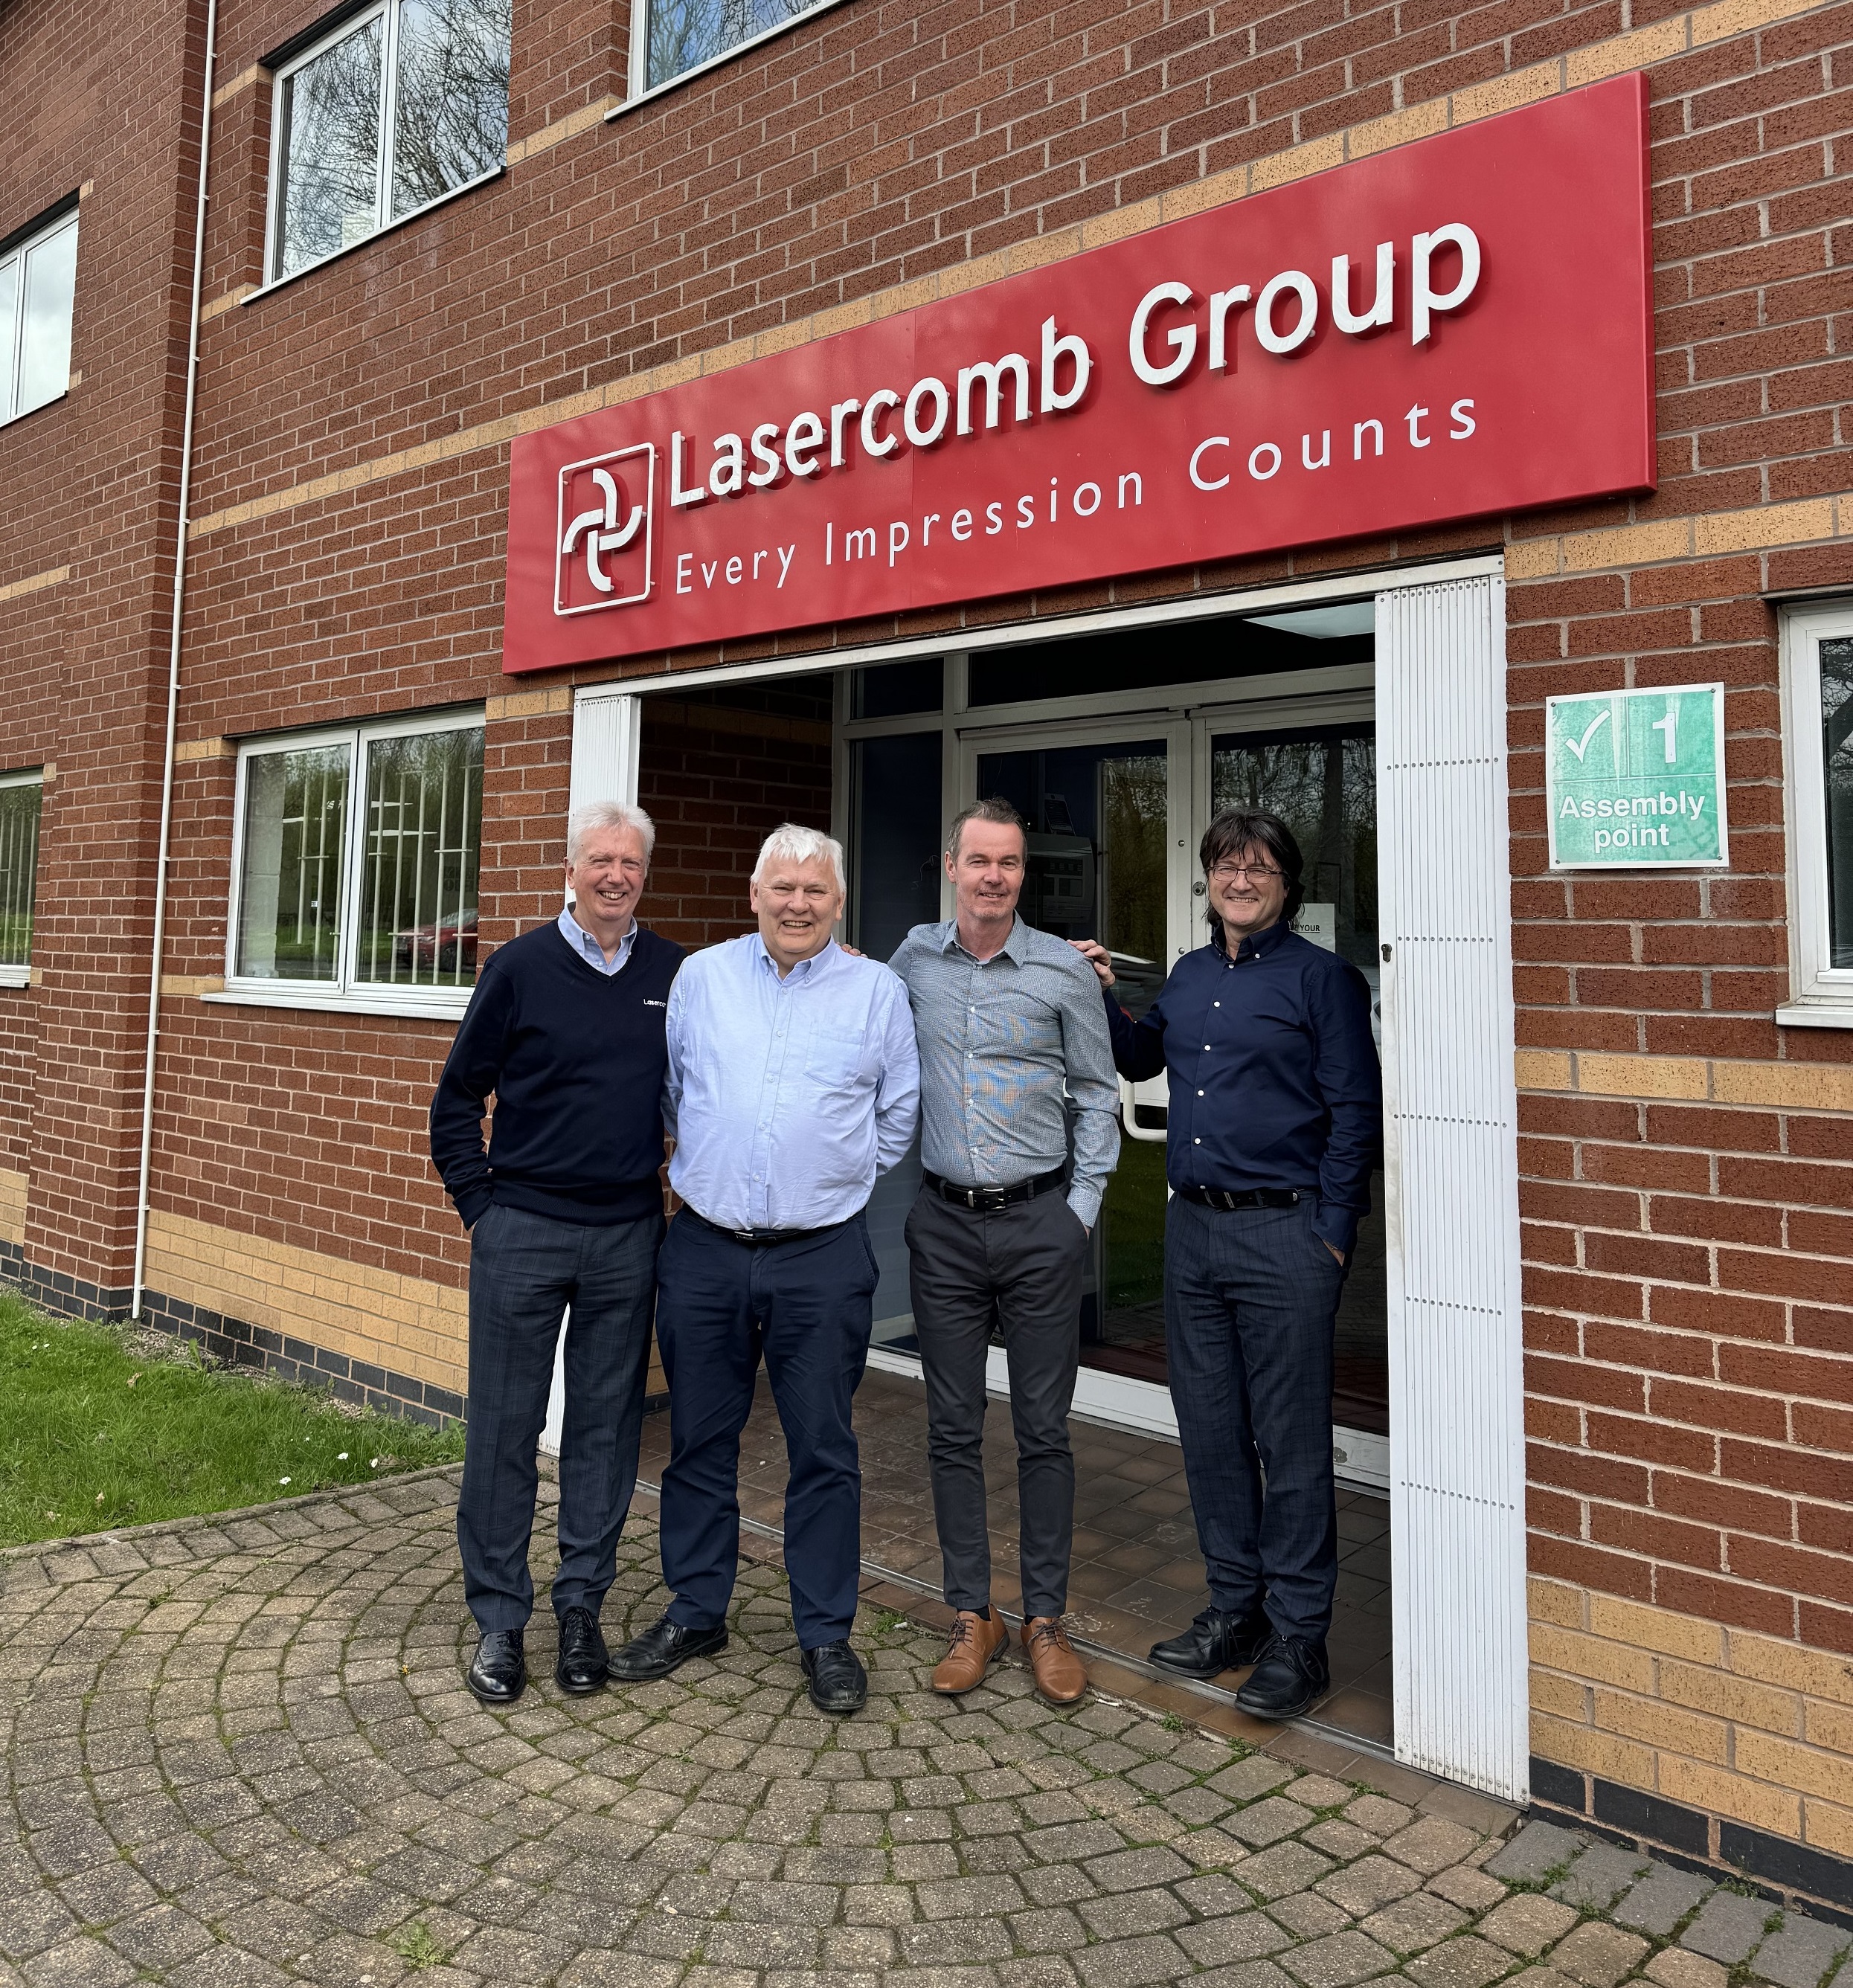 Arden Group Has Announced The Acquisition Of Lasercomb Dies